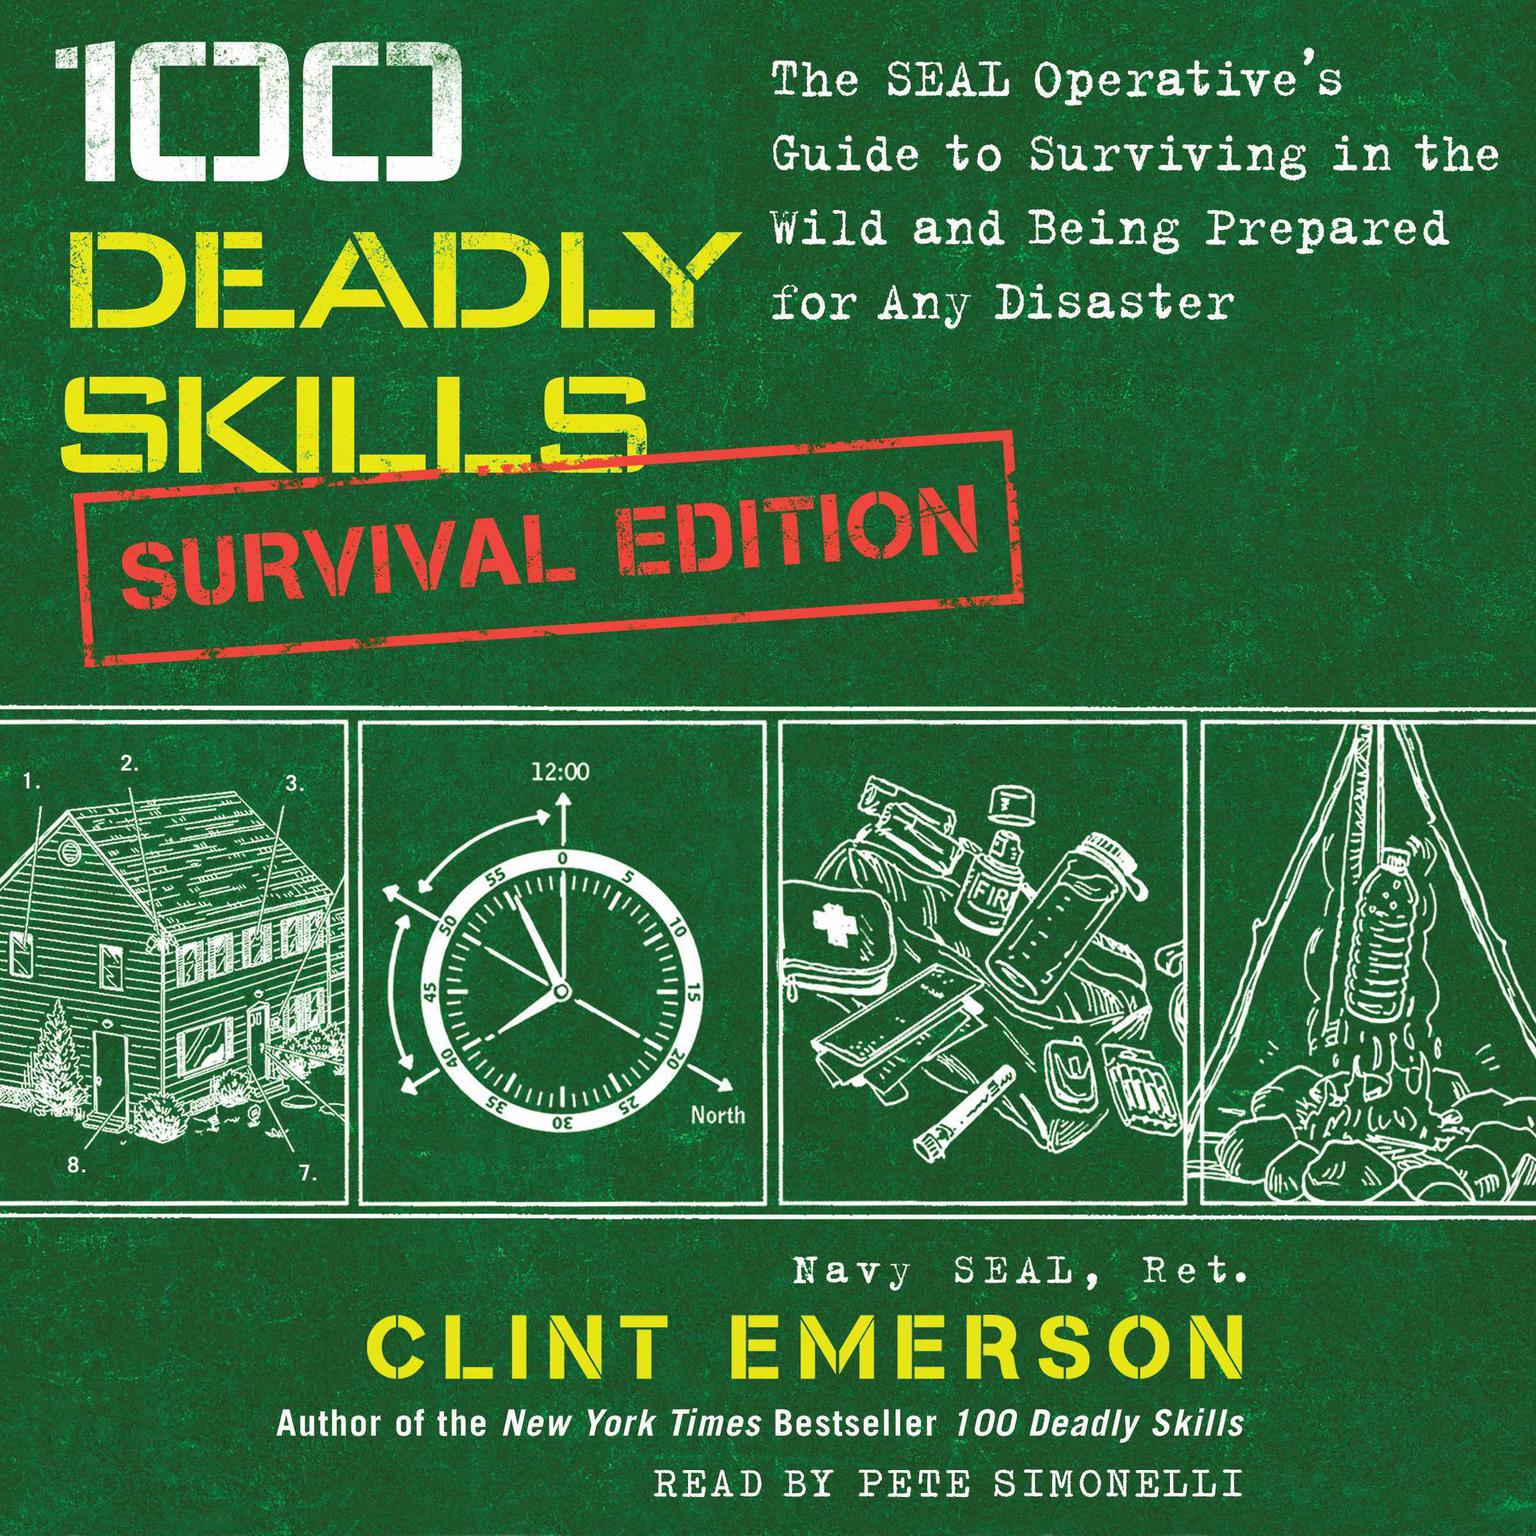 100 Deadly Skills: Survival Edition: The SEAL Operatives Guide to Surviving in the Wild and Being Prepared for Any Disaster Audiobook, by Clint Emerson